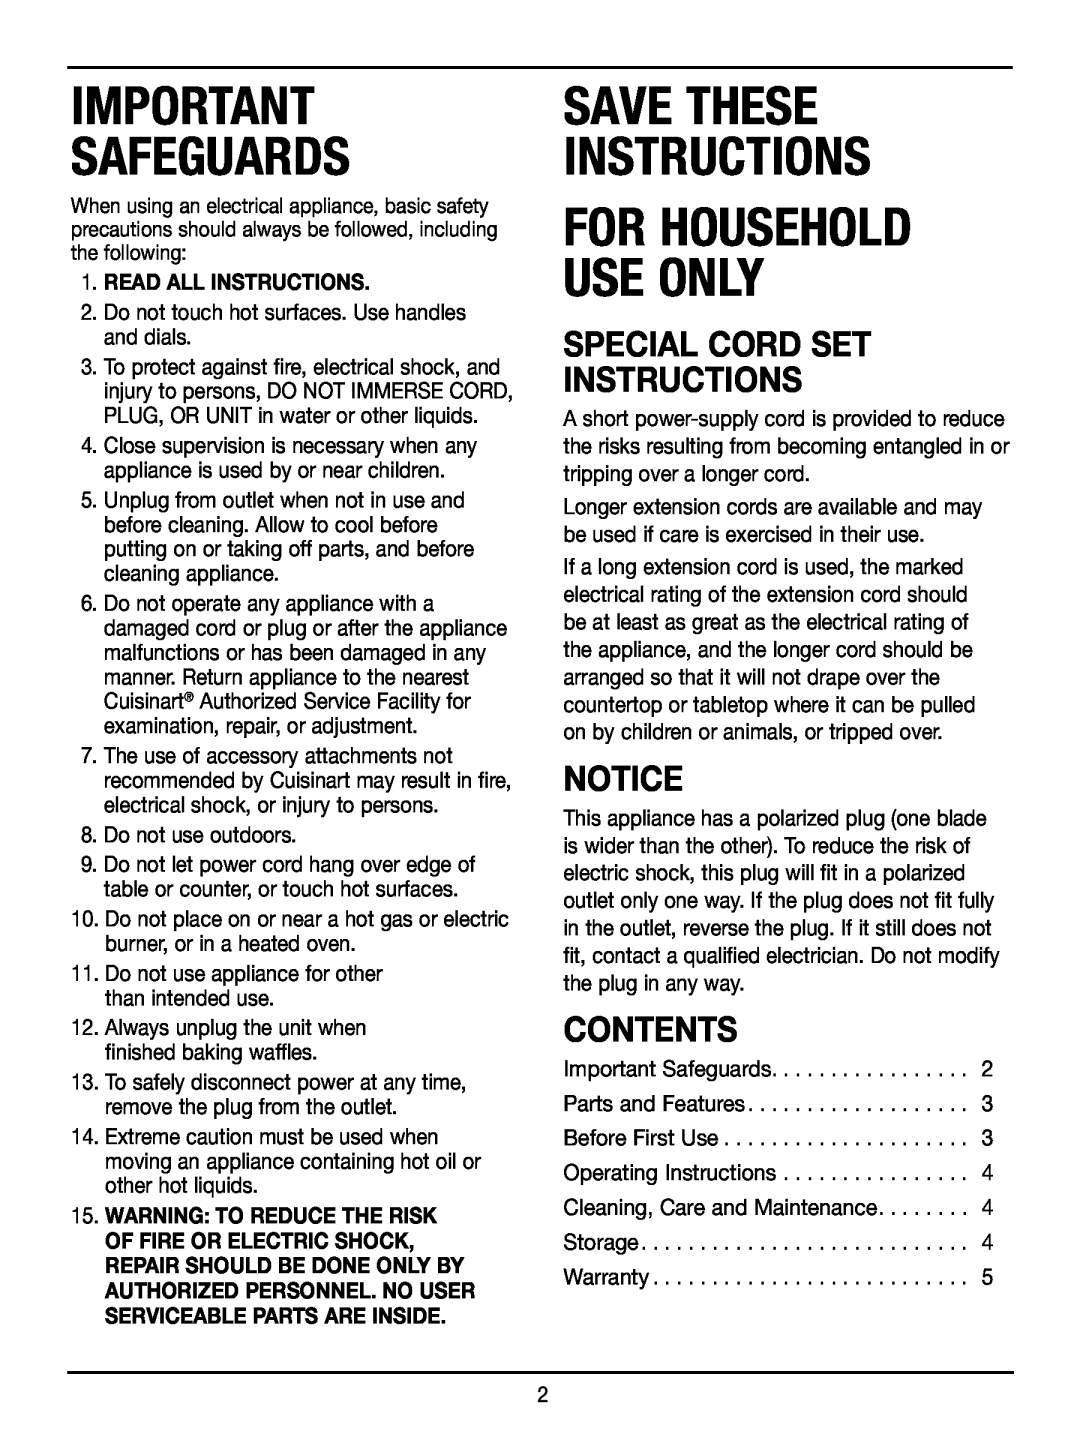 Cuisinart WAF-100 Special Cord Set Instructions, Contents, Read All Instructions, Safeguards, Save These Instructions 